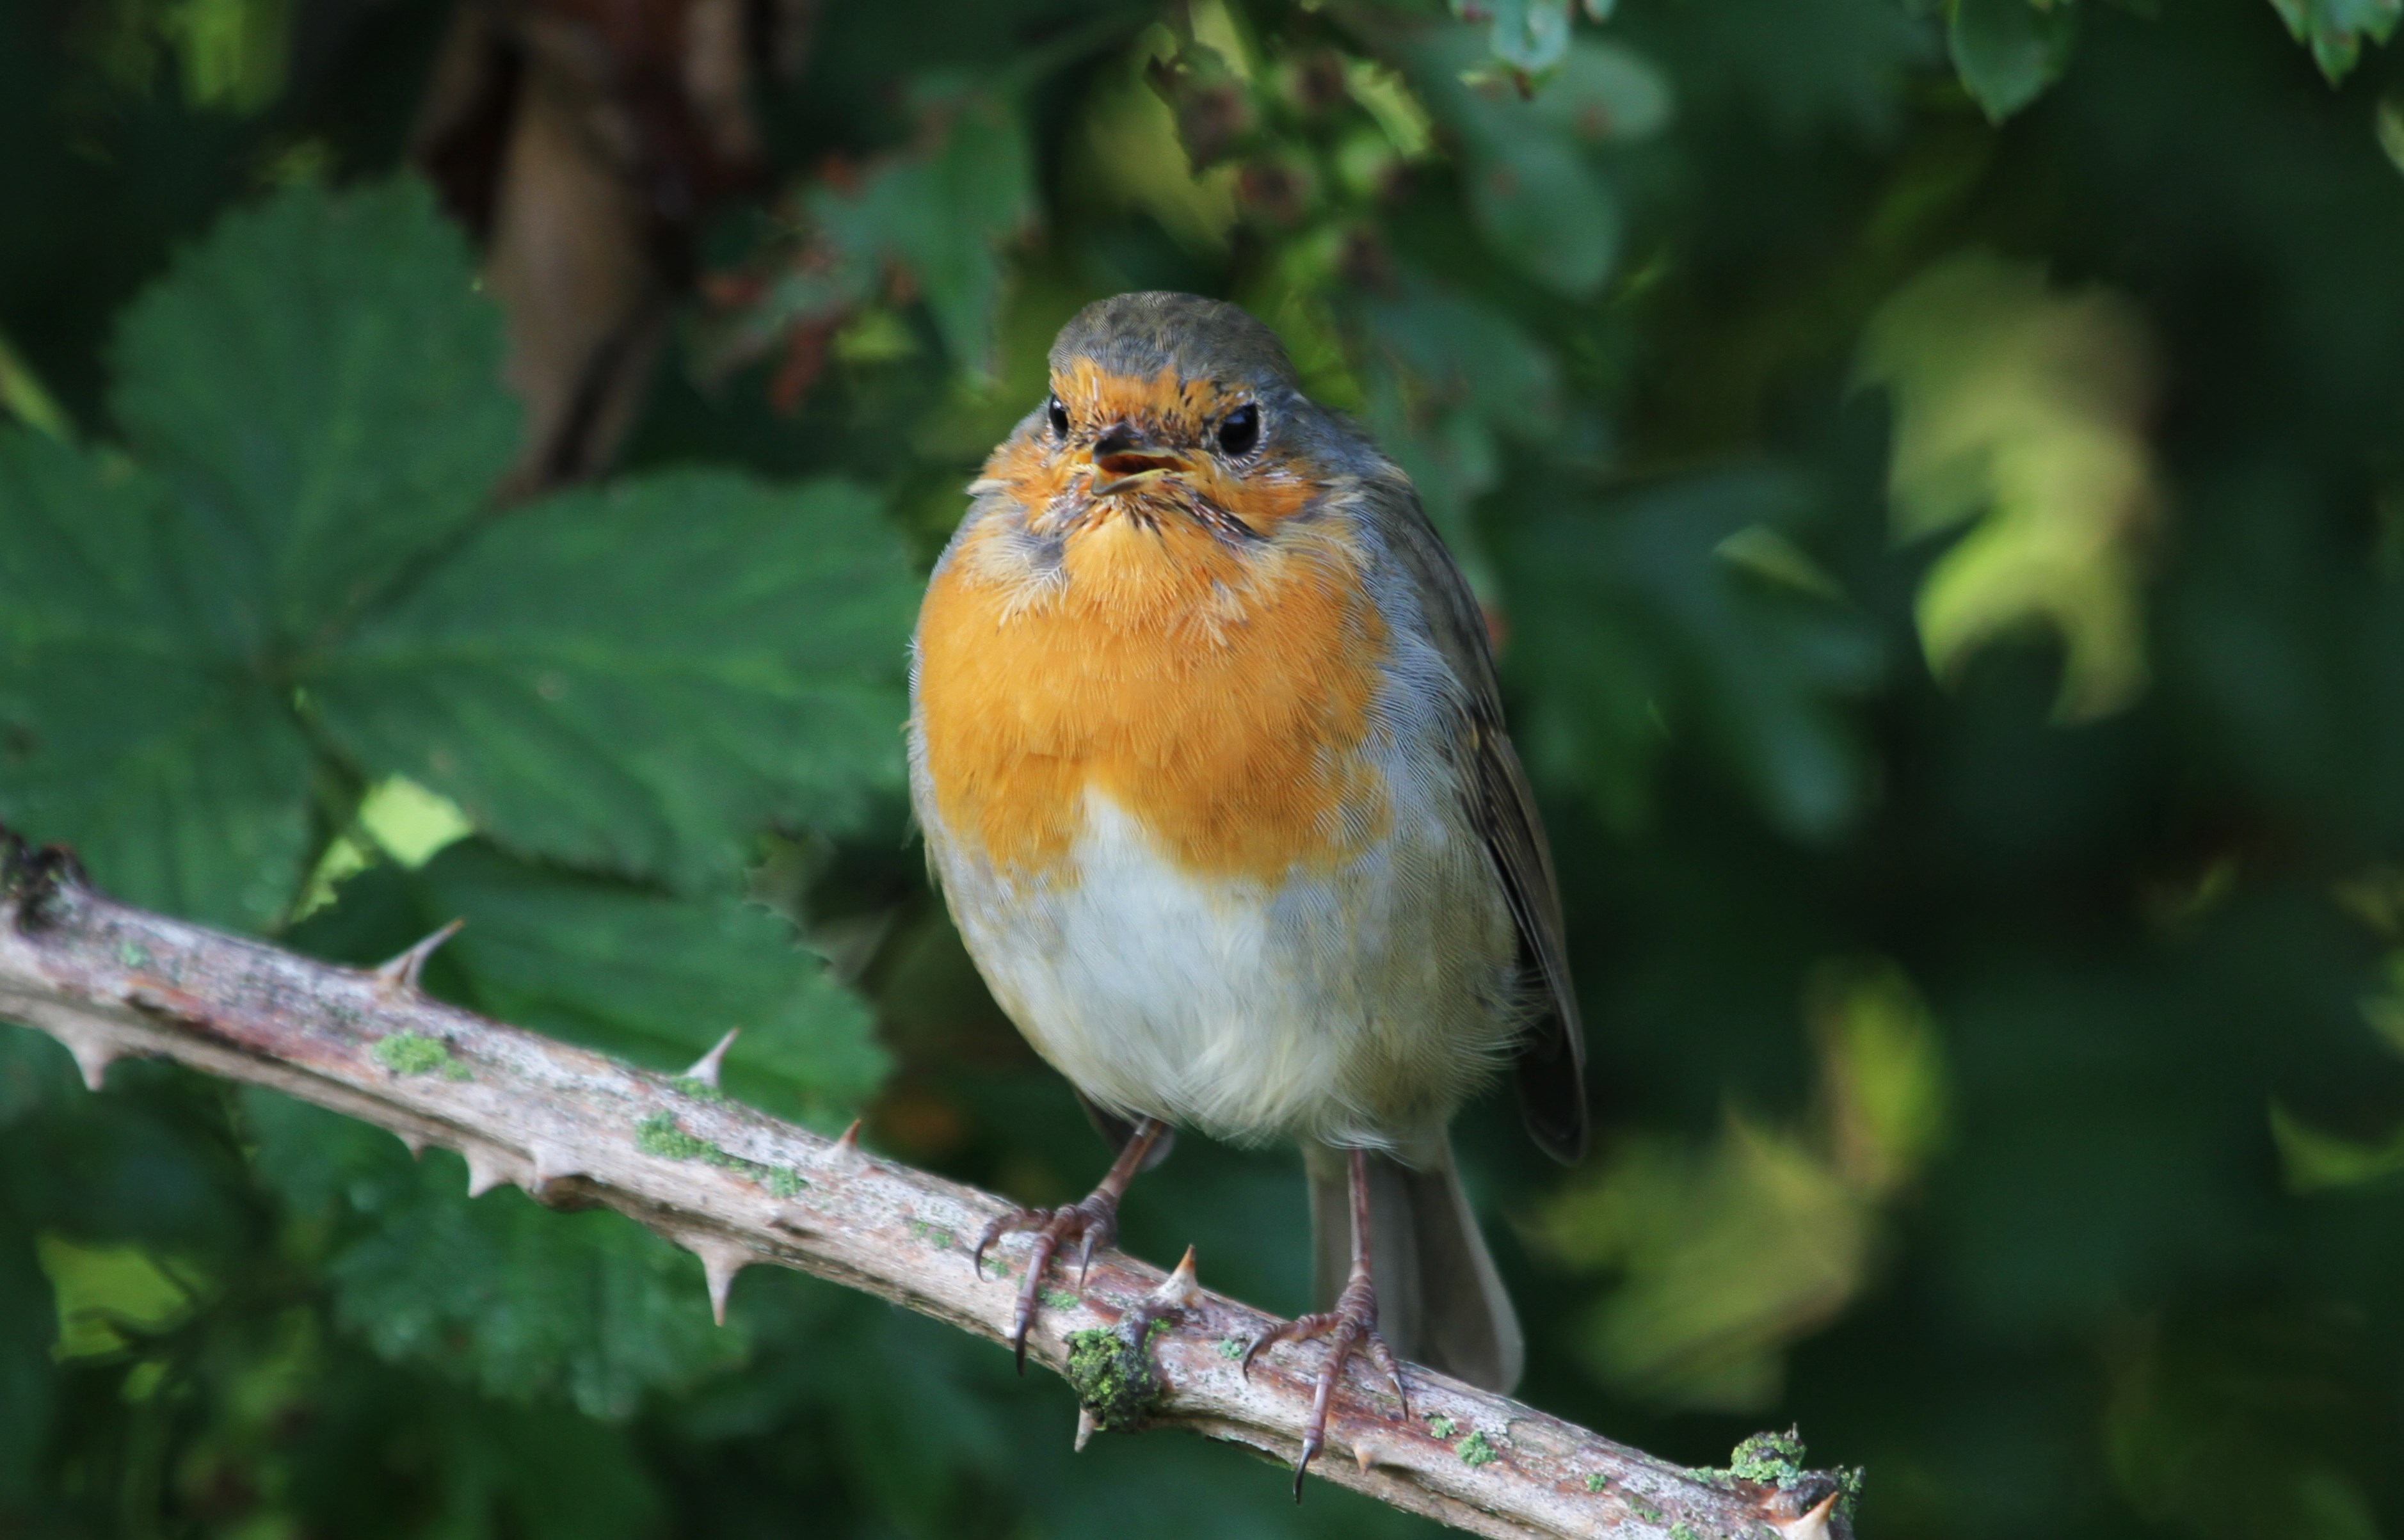 Robin crowned as UK's national bird: It's aggressive, vicious, but